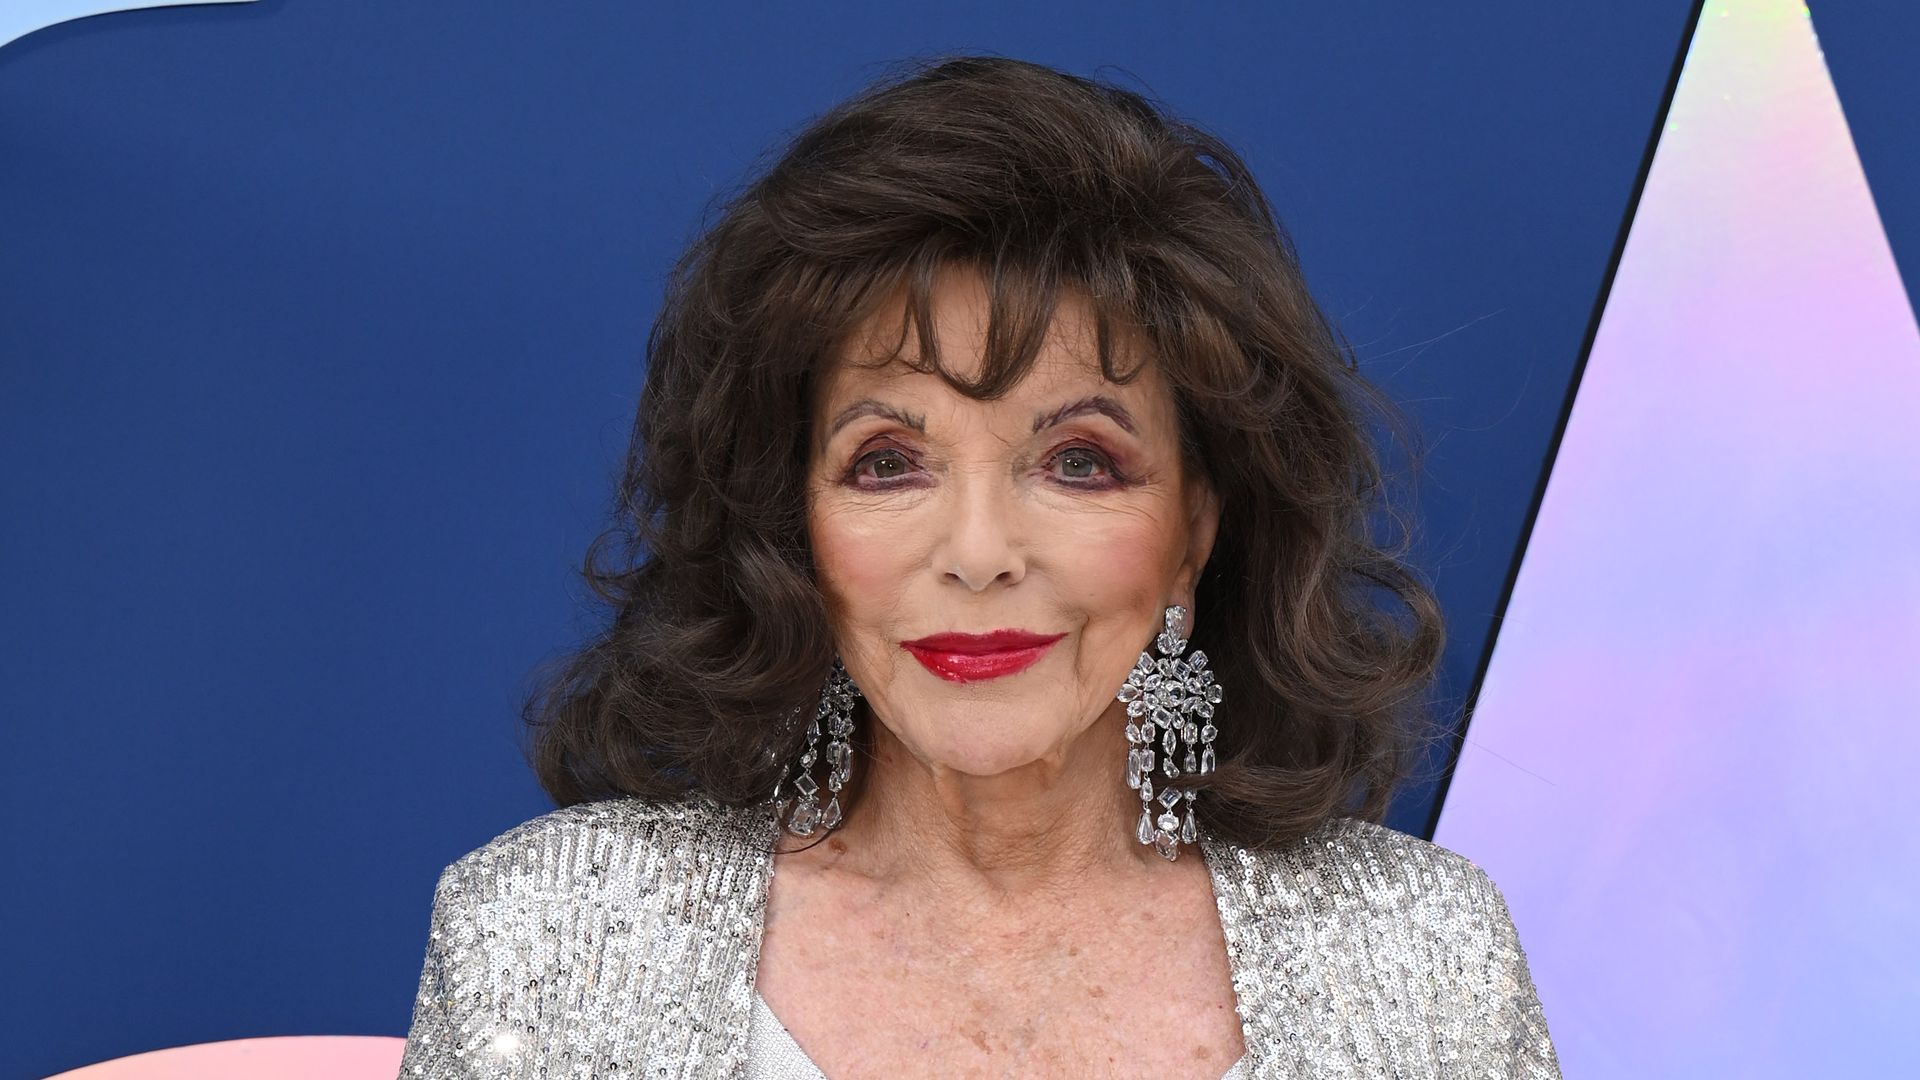 Joan Collins in silver gown with jacket